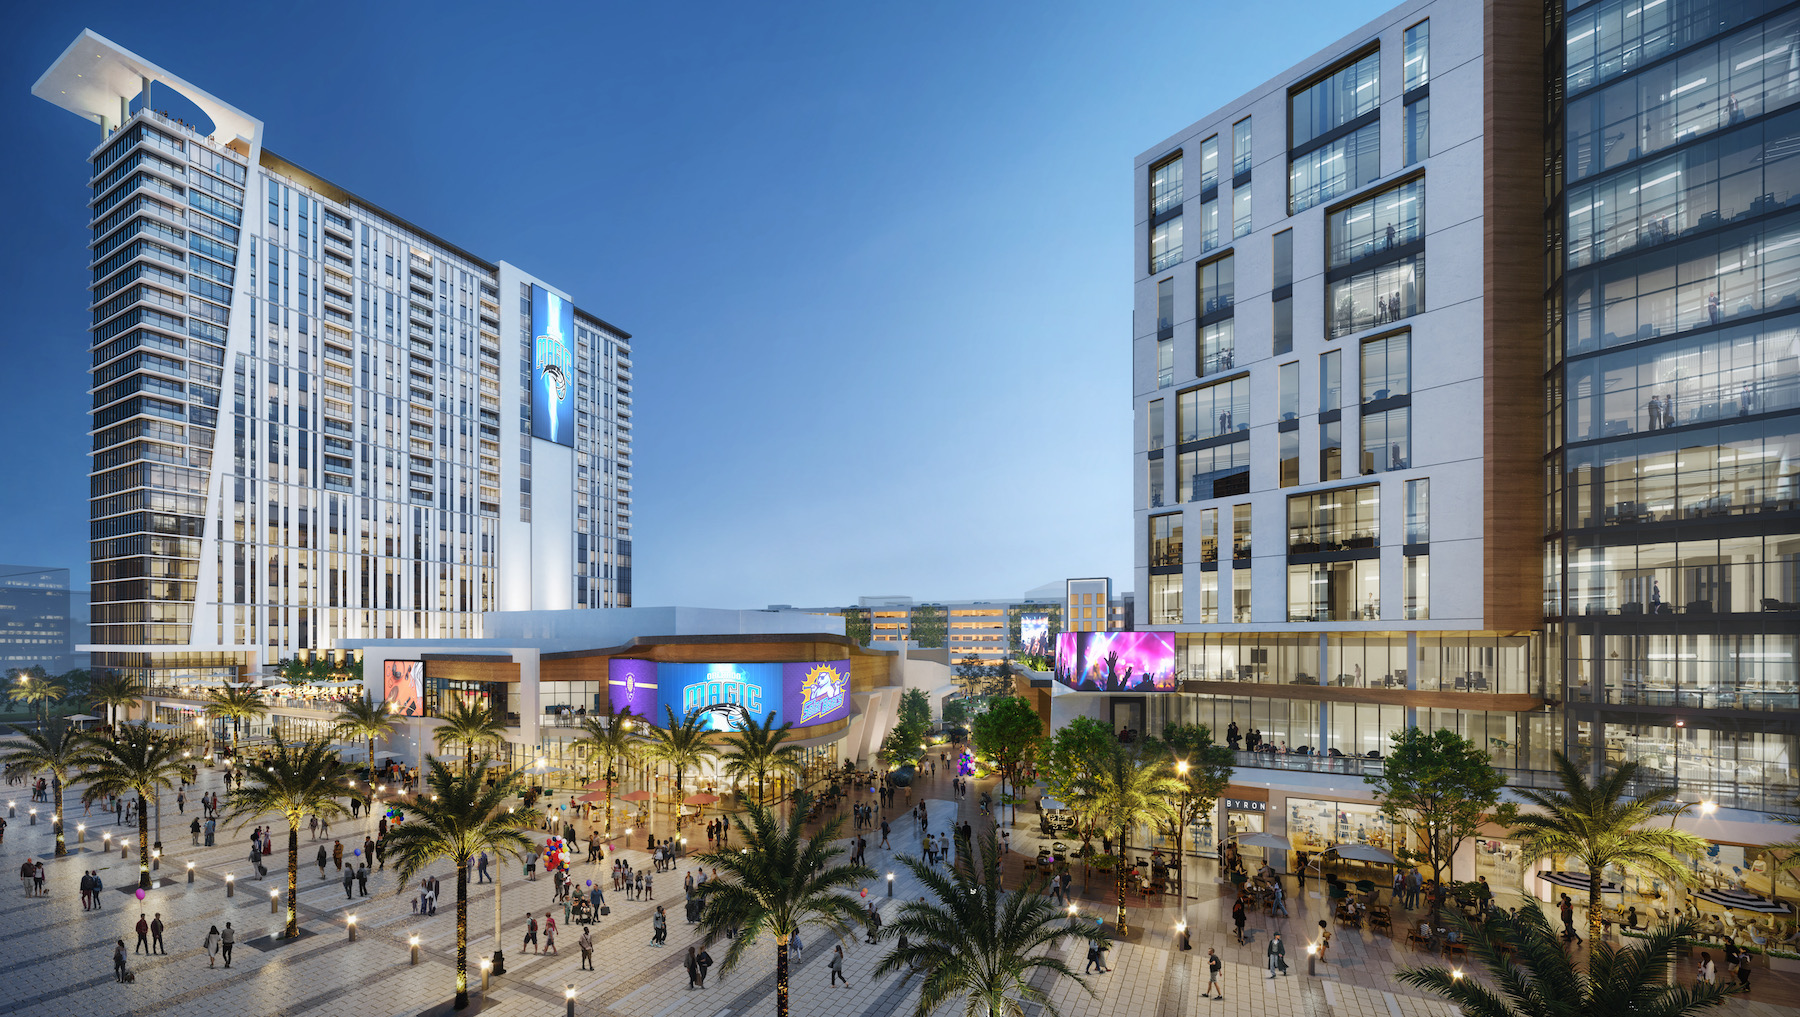 Rendering if Orlando sports and entertainment district